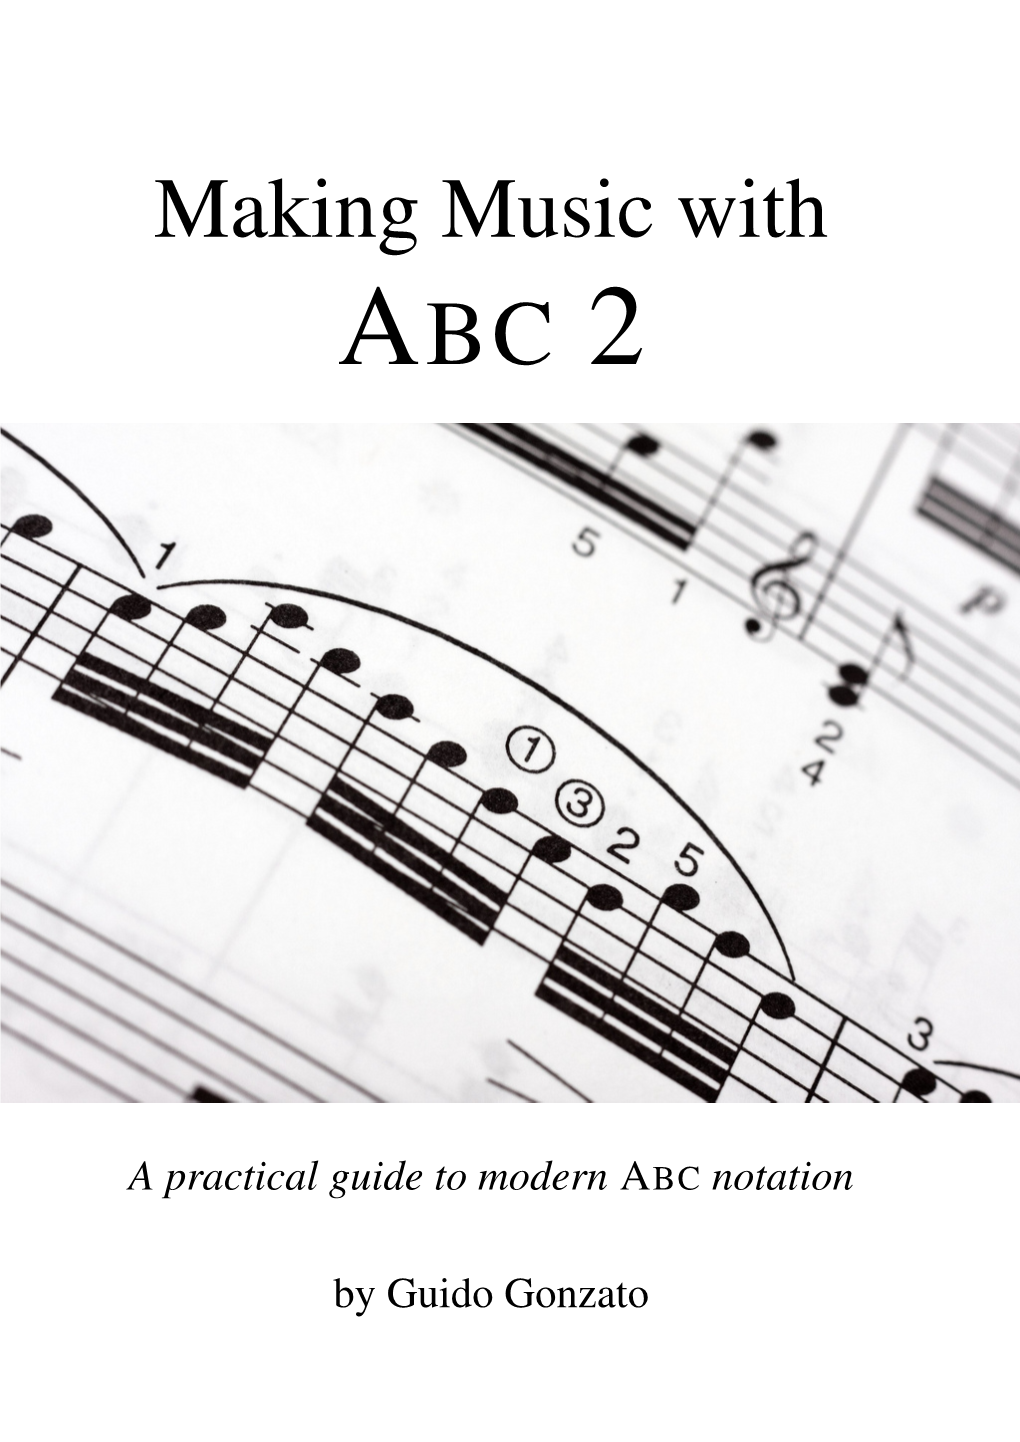 Making Music with ABC 2